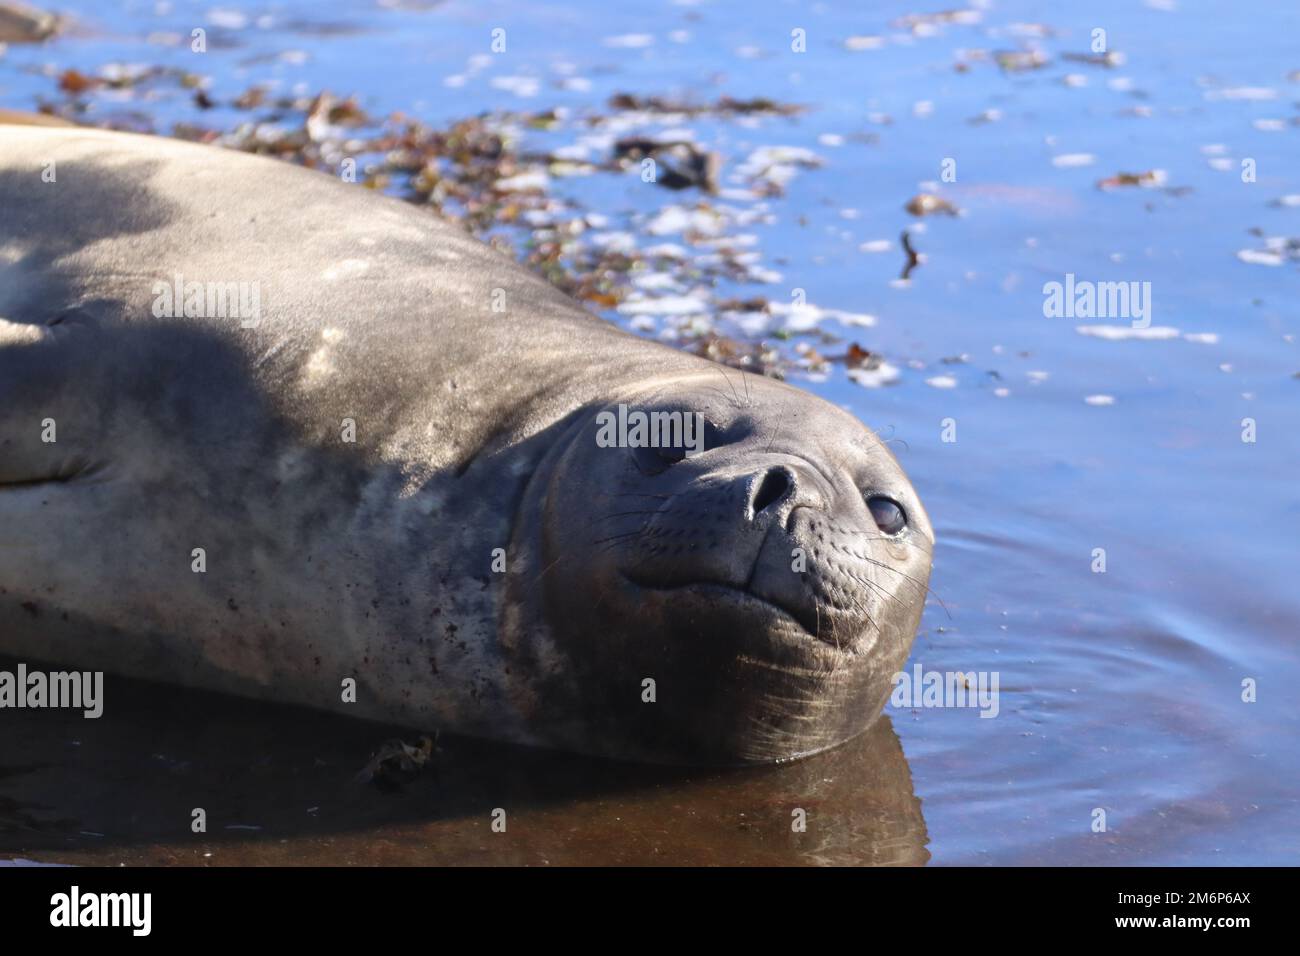 Elephant seal near North West point at Carcass Island in the Falkland Islands. Stock Photo